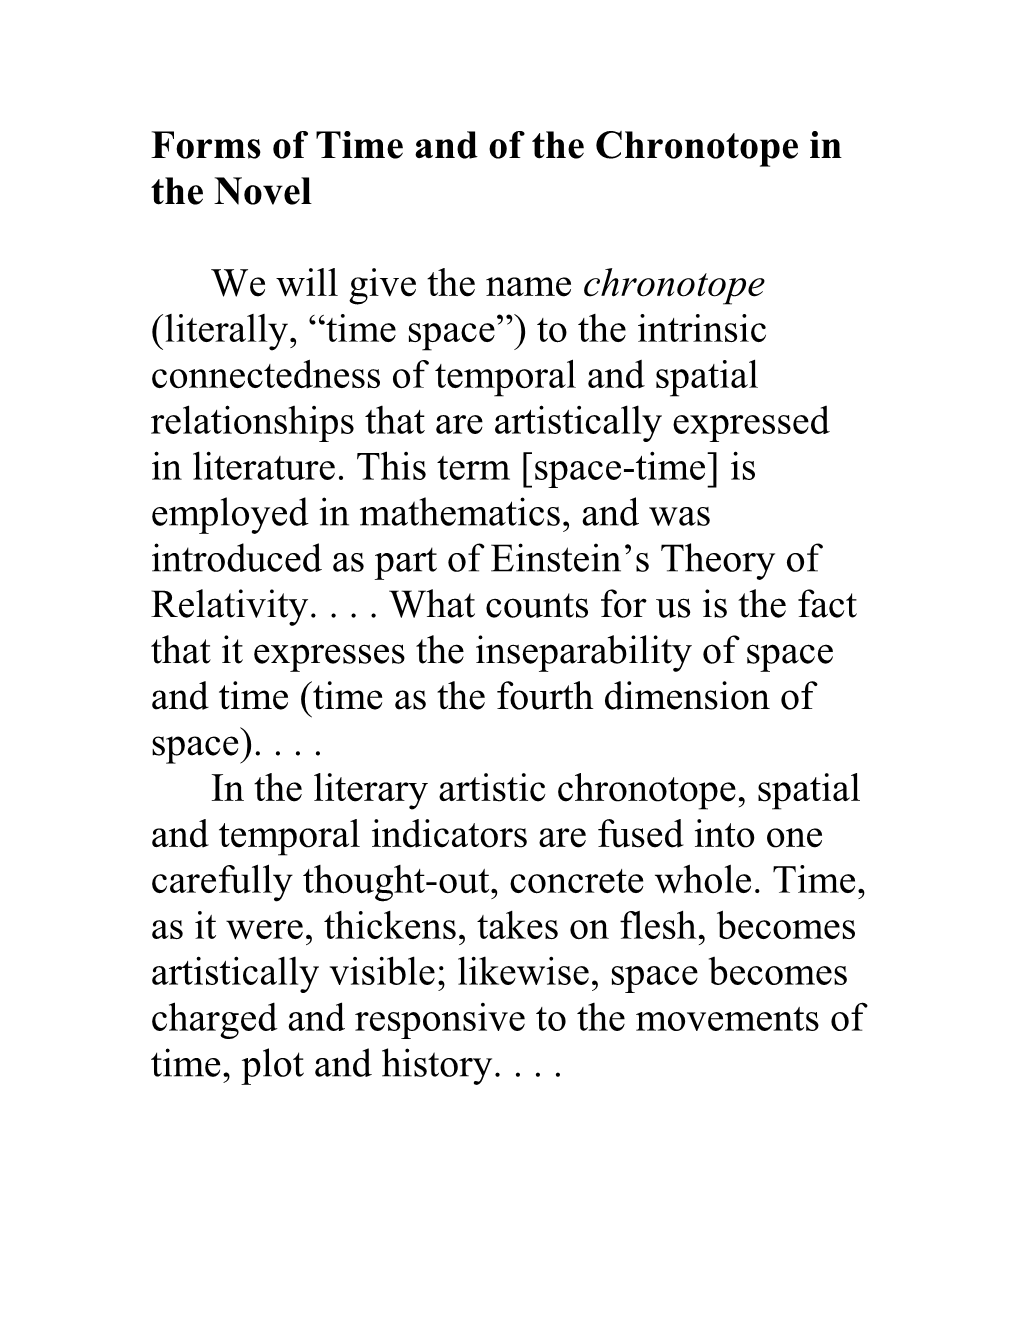 Forms of Time and of the Chronotope in the Novel